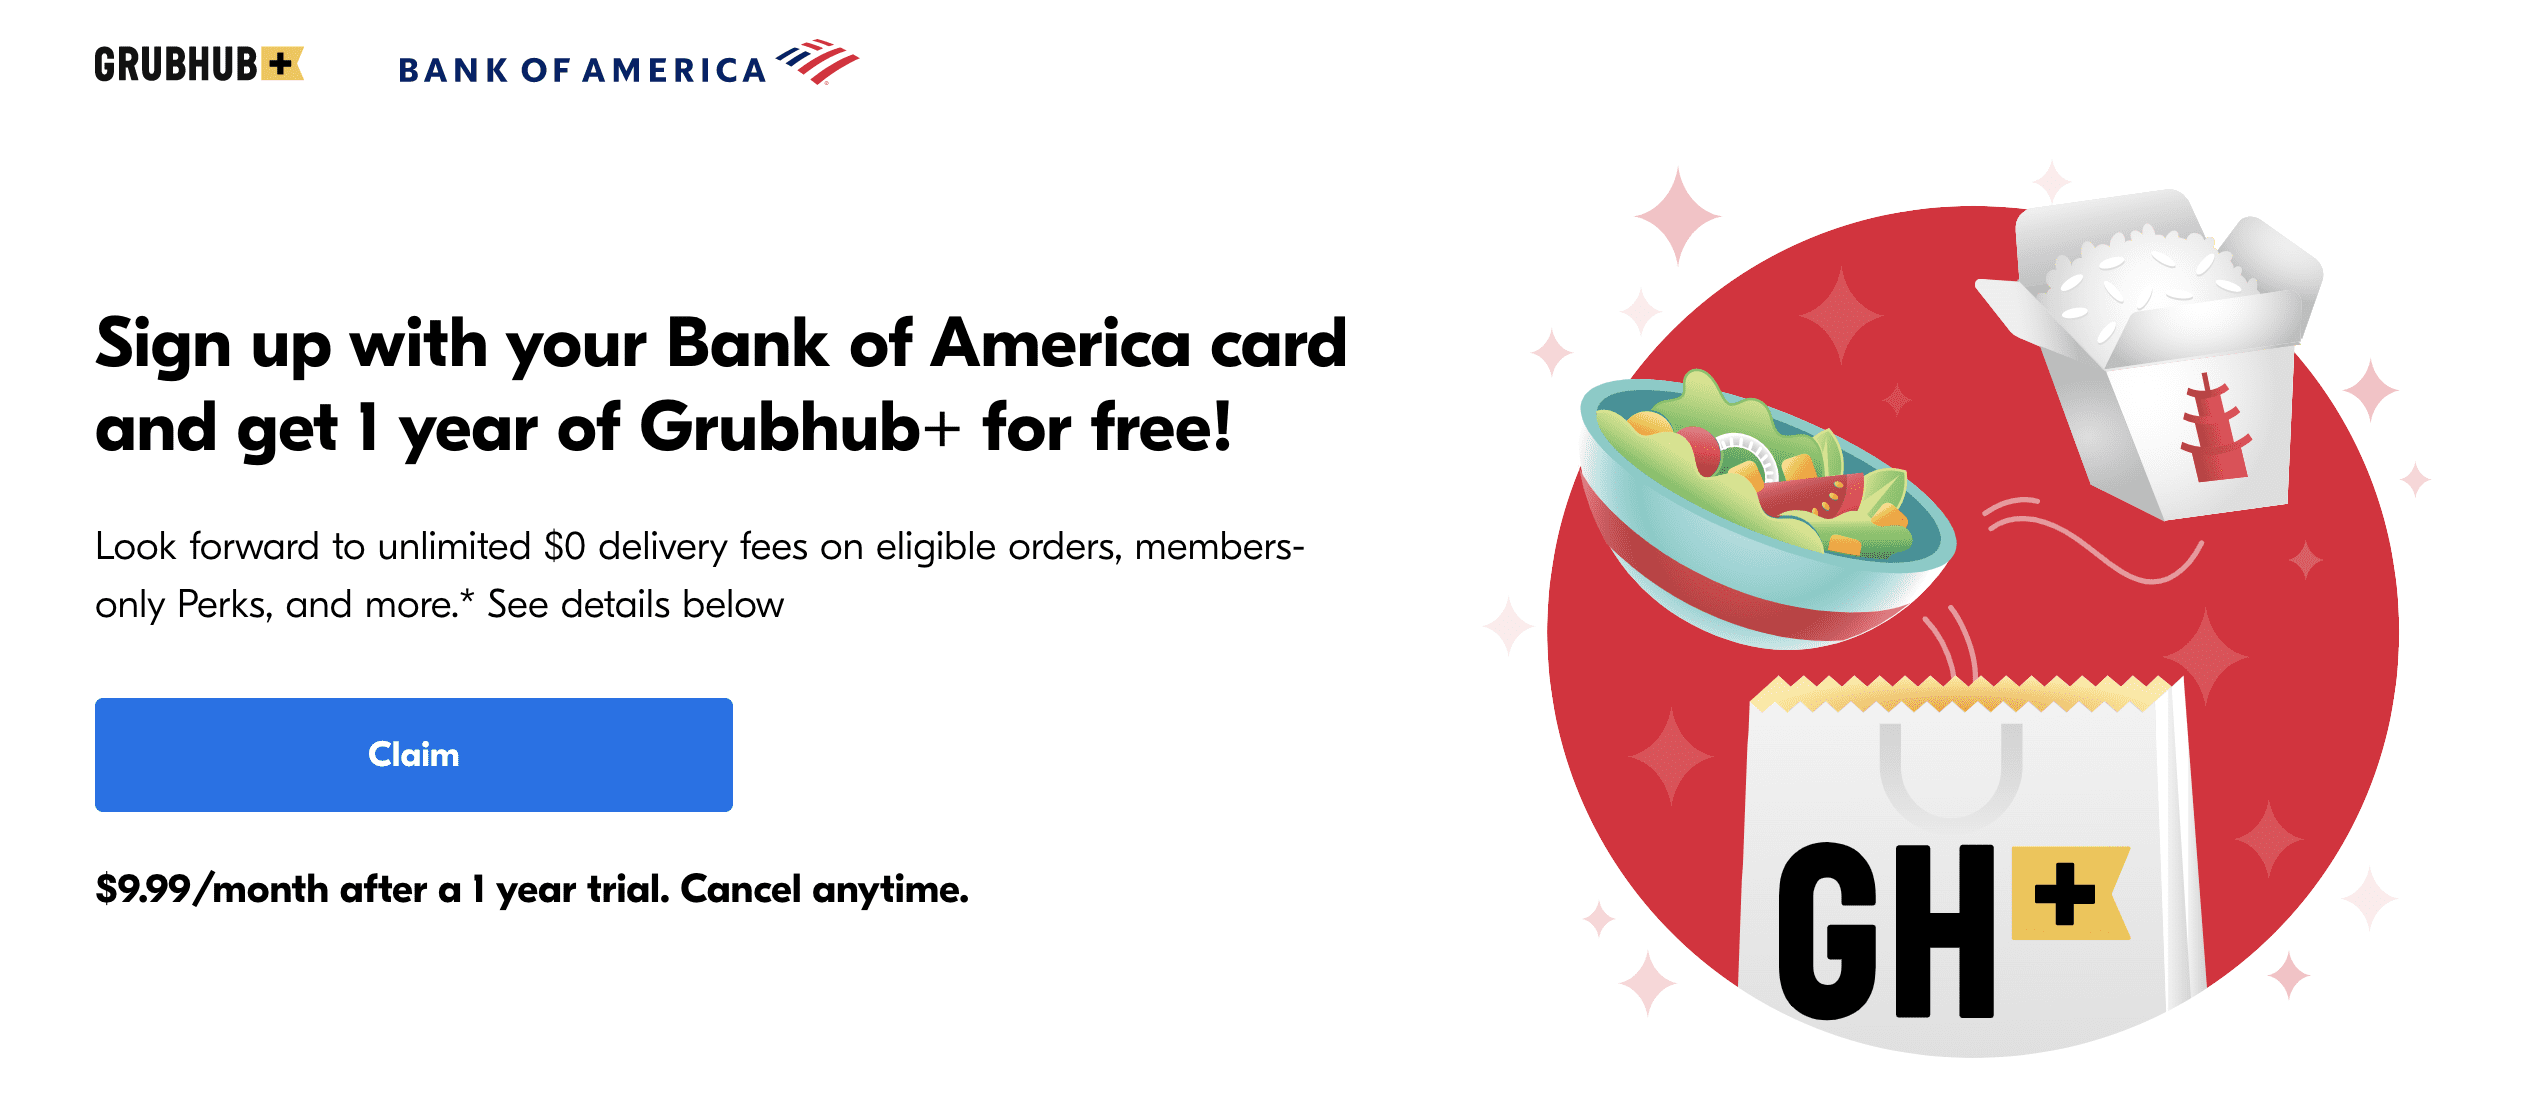 Grubhub and Extend One-Year Free Grubhub+ Offer for U.S. Prime